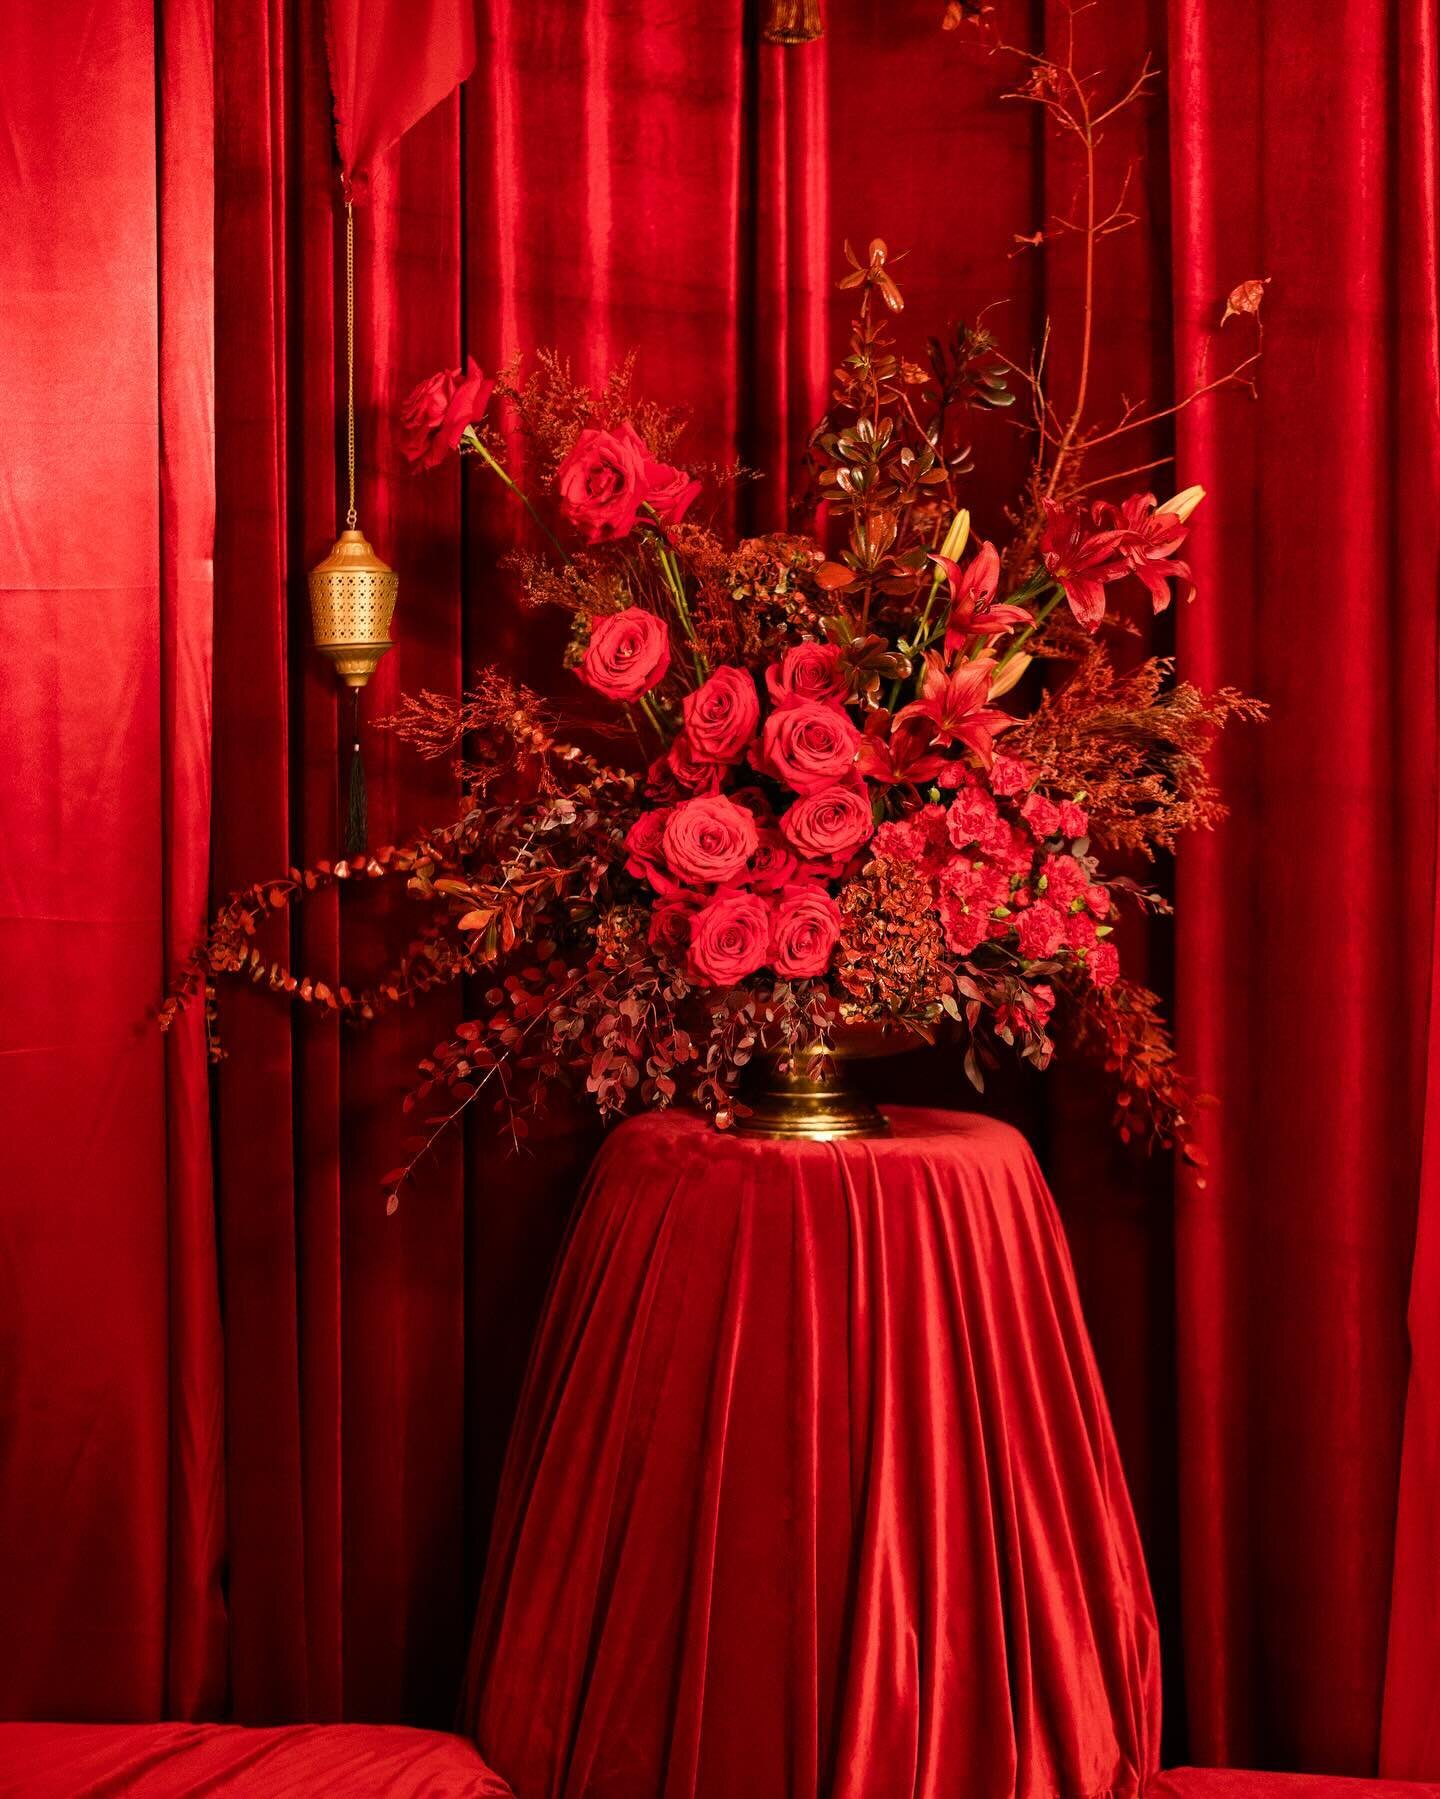 R U B Y 
A closer look into one of our monochromatic rooms. Jeffrey Mansion was a perfect fit to execute this modern day masquerade theme. All of the spaces allowed us to make a new experience in each room. 
.
The Ruby room featured a decked out bar 